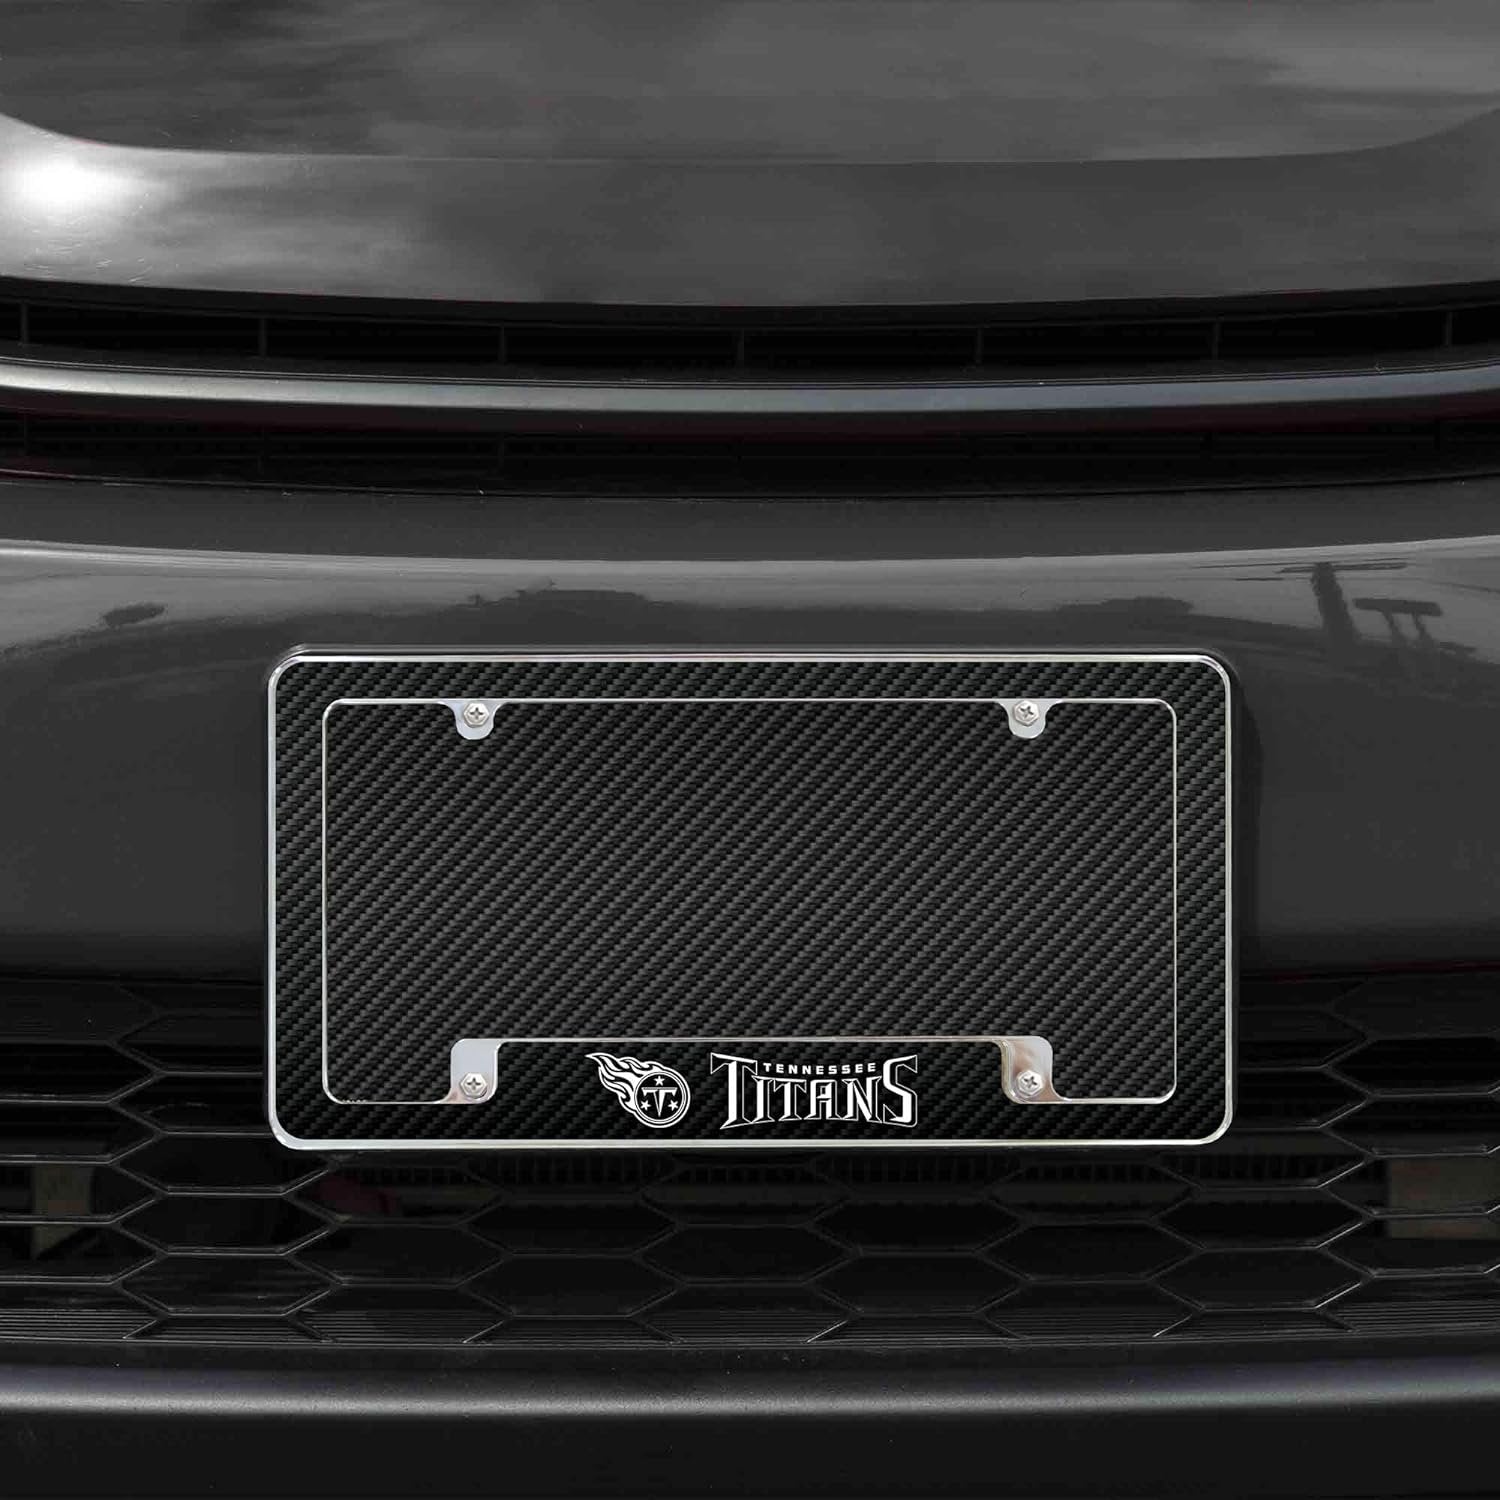 Tennessee Titans Metal License Plate Frame Chrome Tag Cover, Carbon Fiber Design, 6x12 Inch